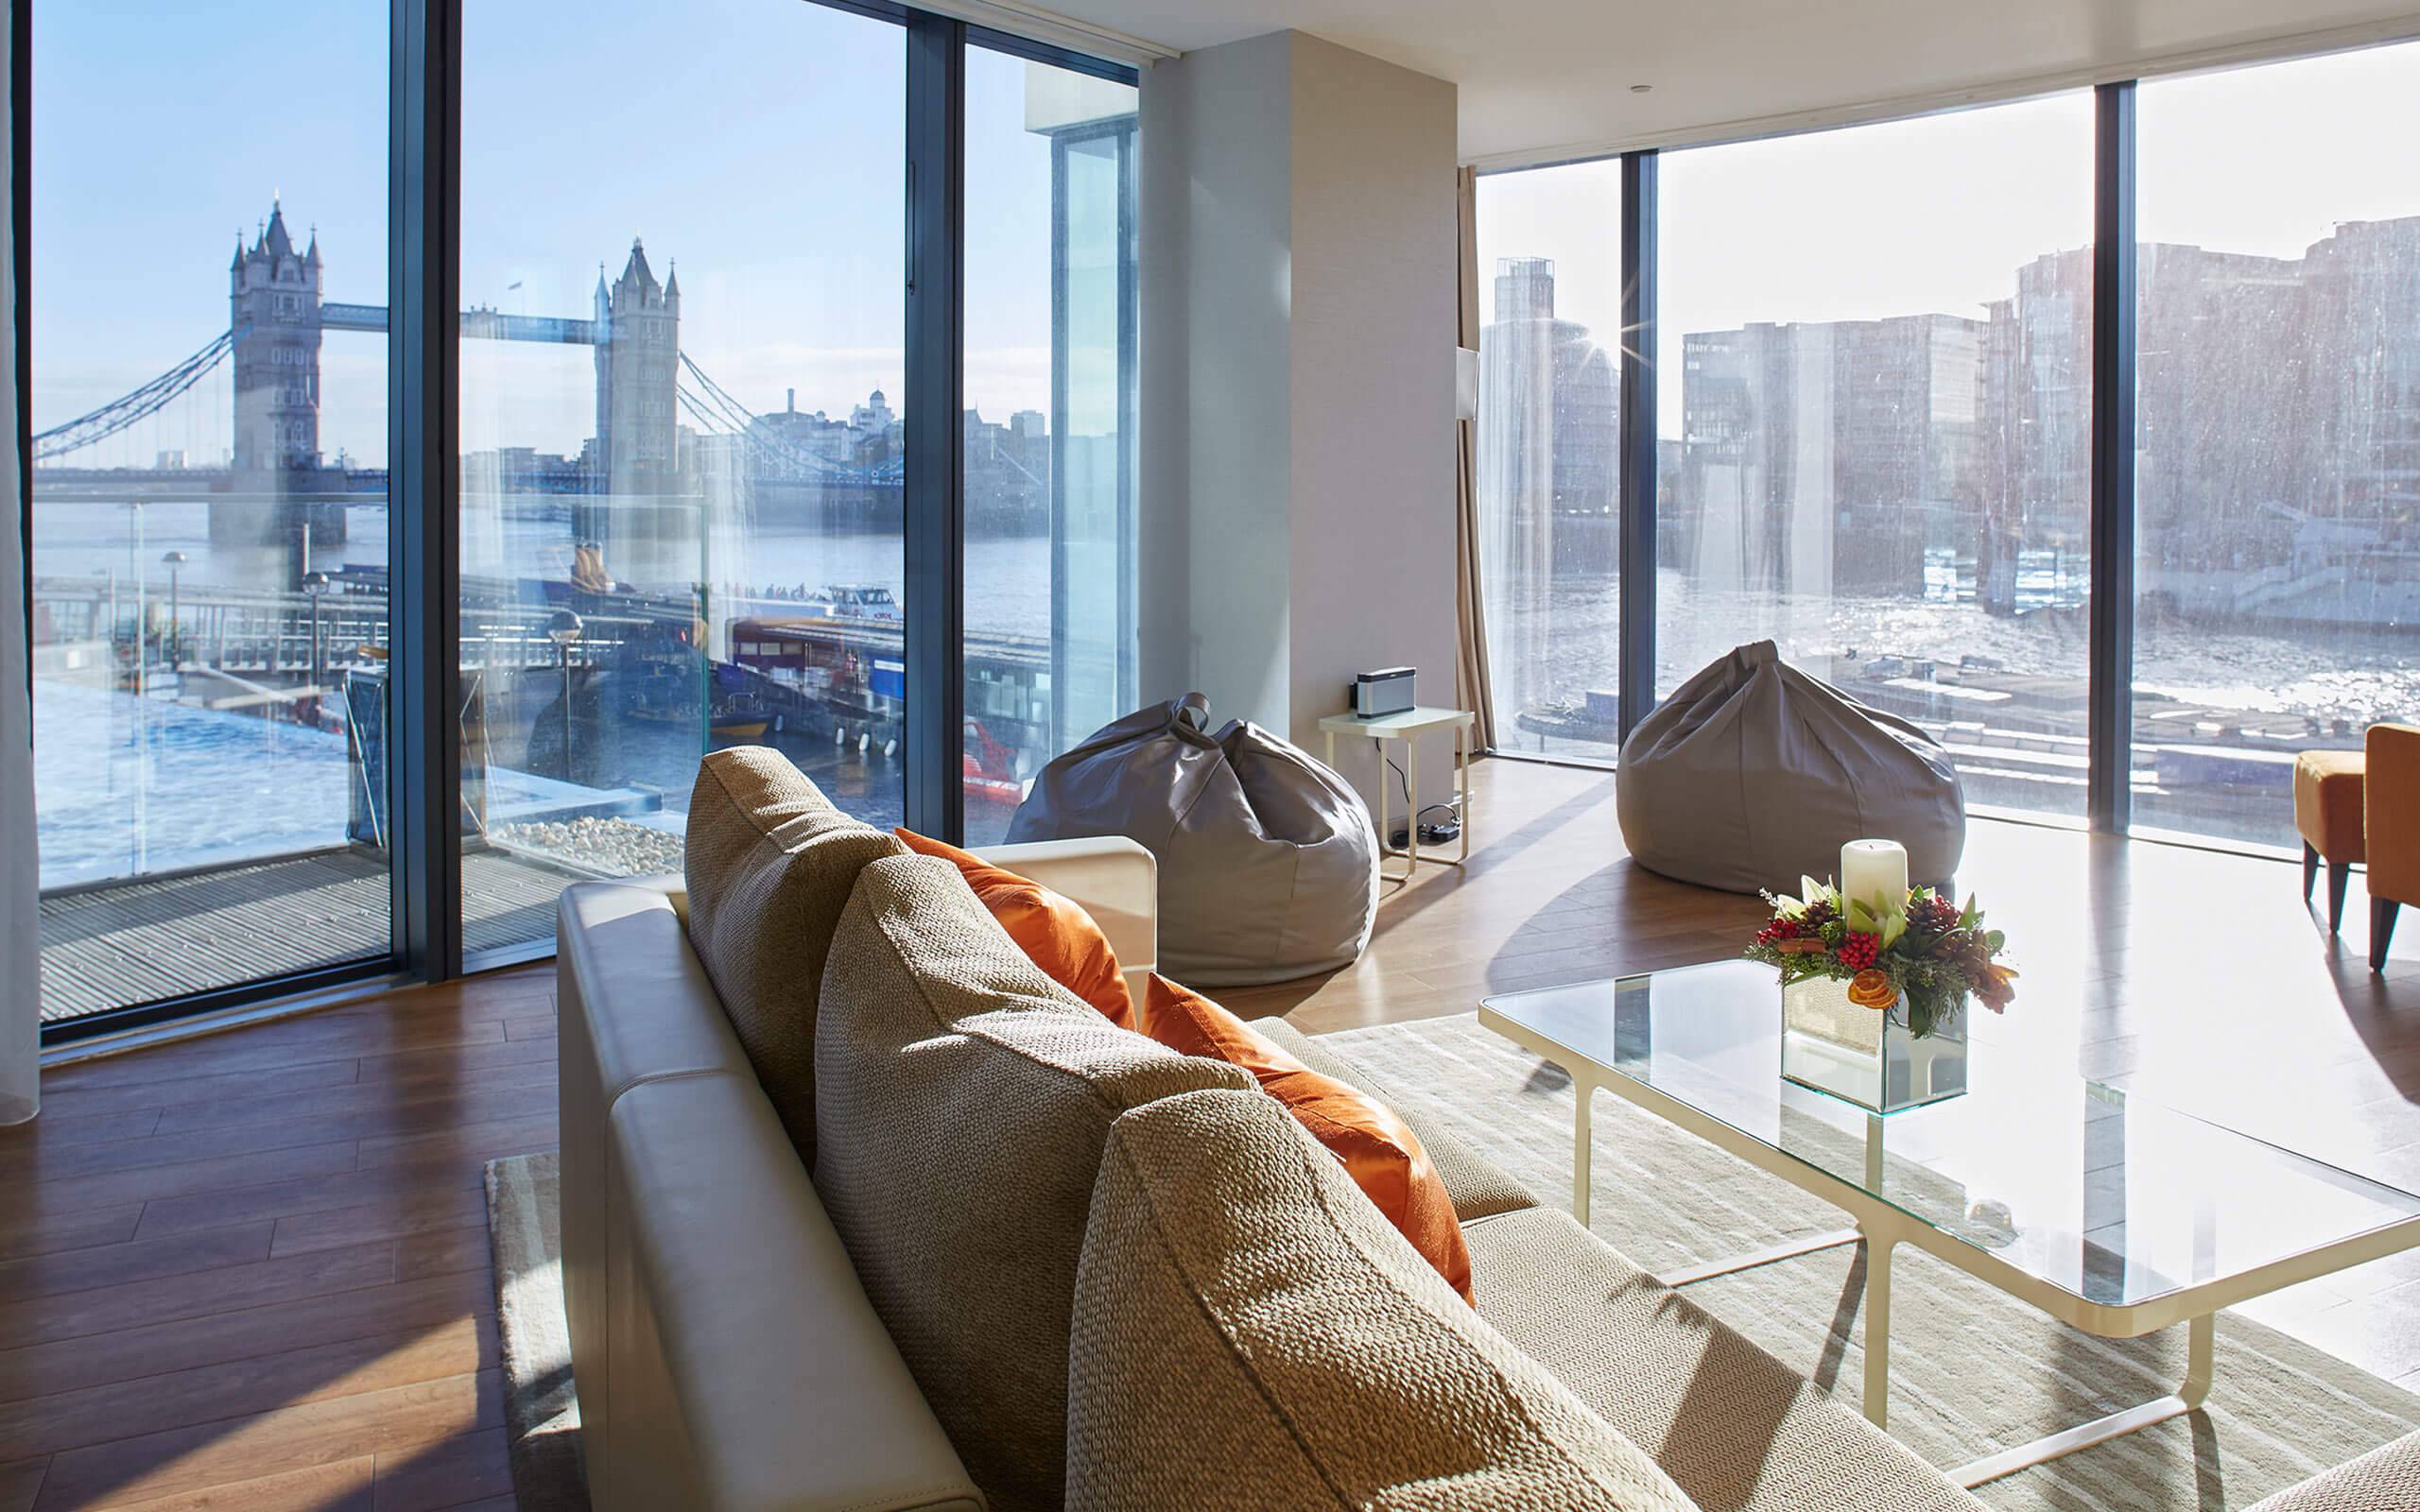 Five-Star Serviced Apartment - Deluxe Two Bedroom Suite﻿ with Iconic Thames River Views in Tower Bridge